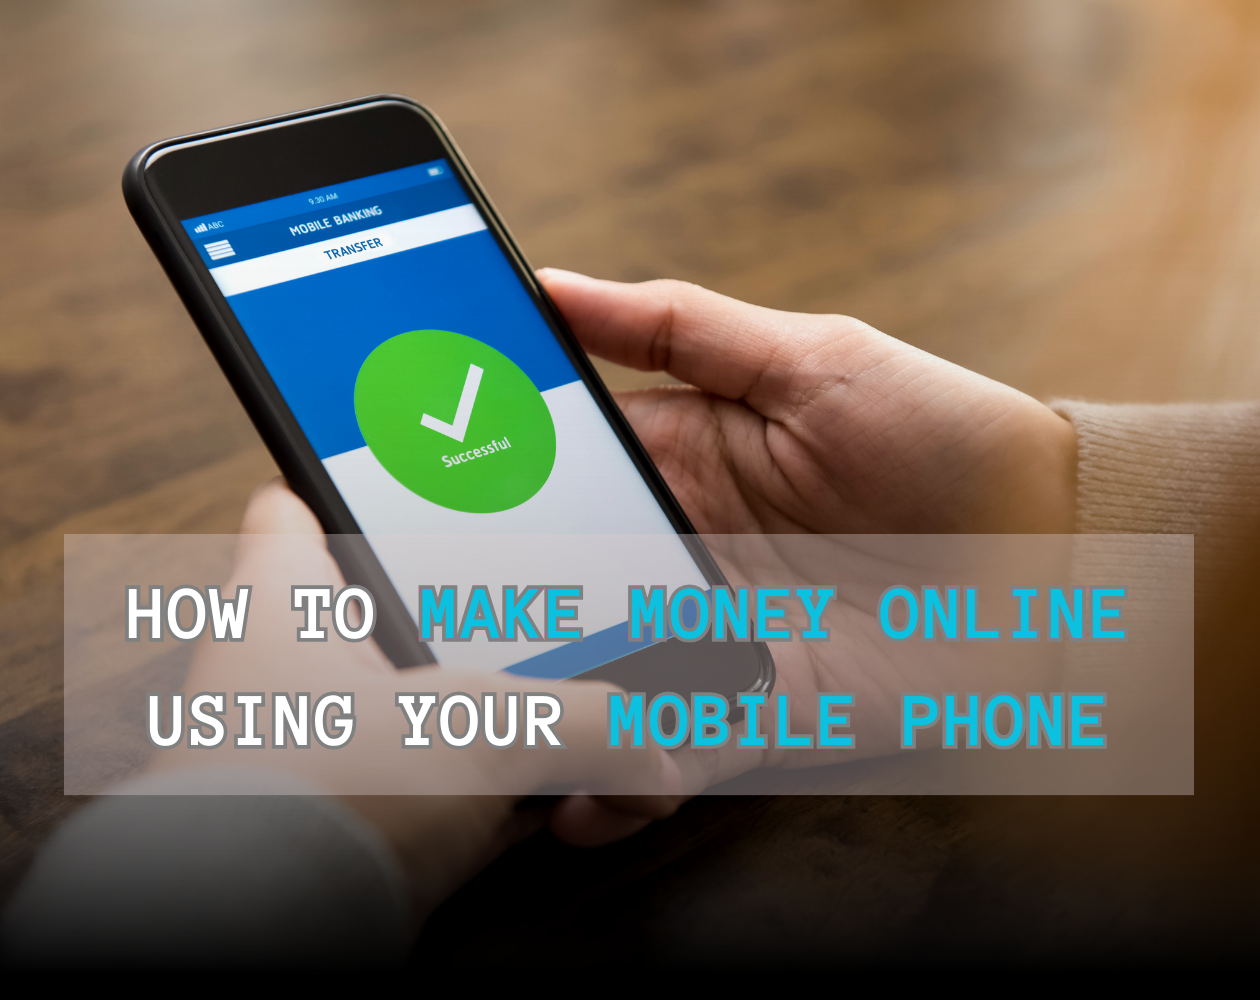 How to make money online using your mobile phone, make money with Facebook reels